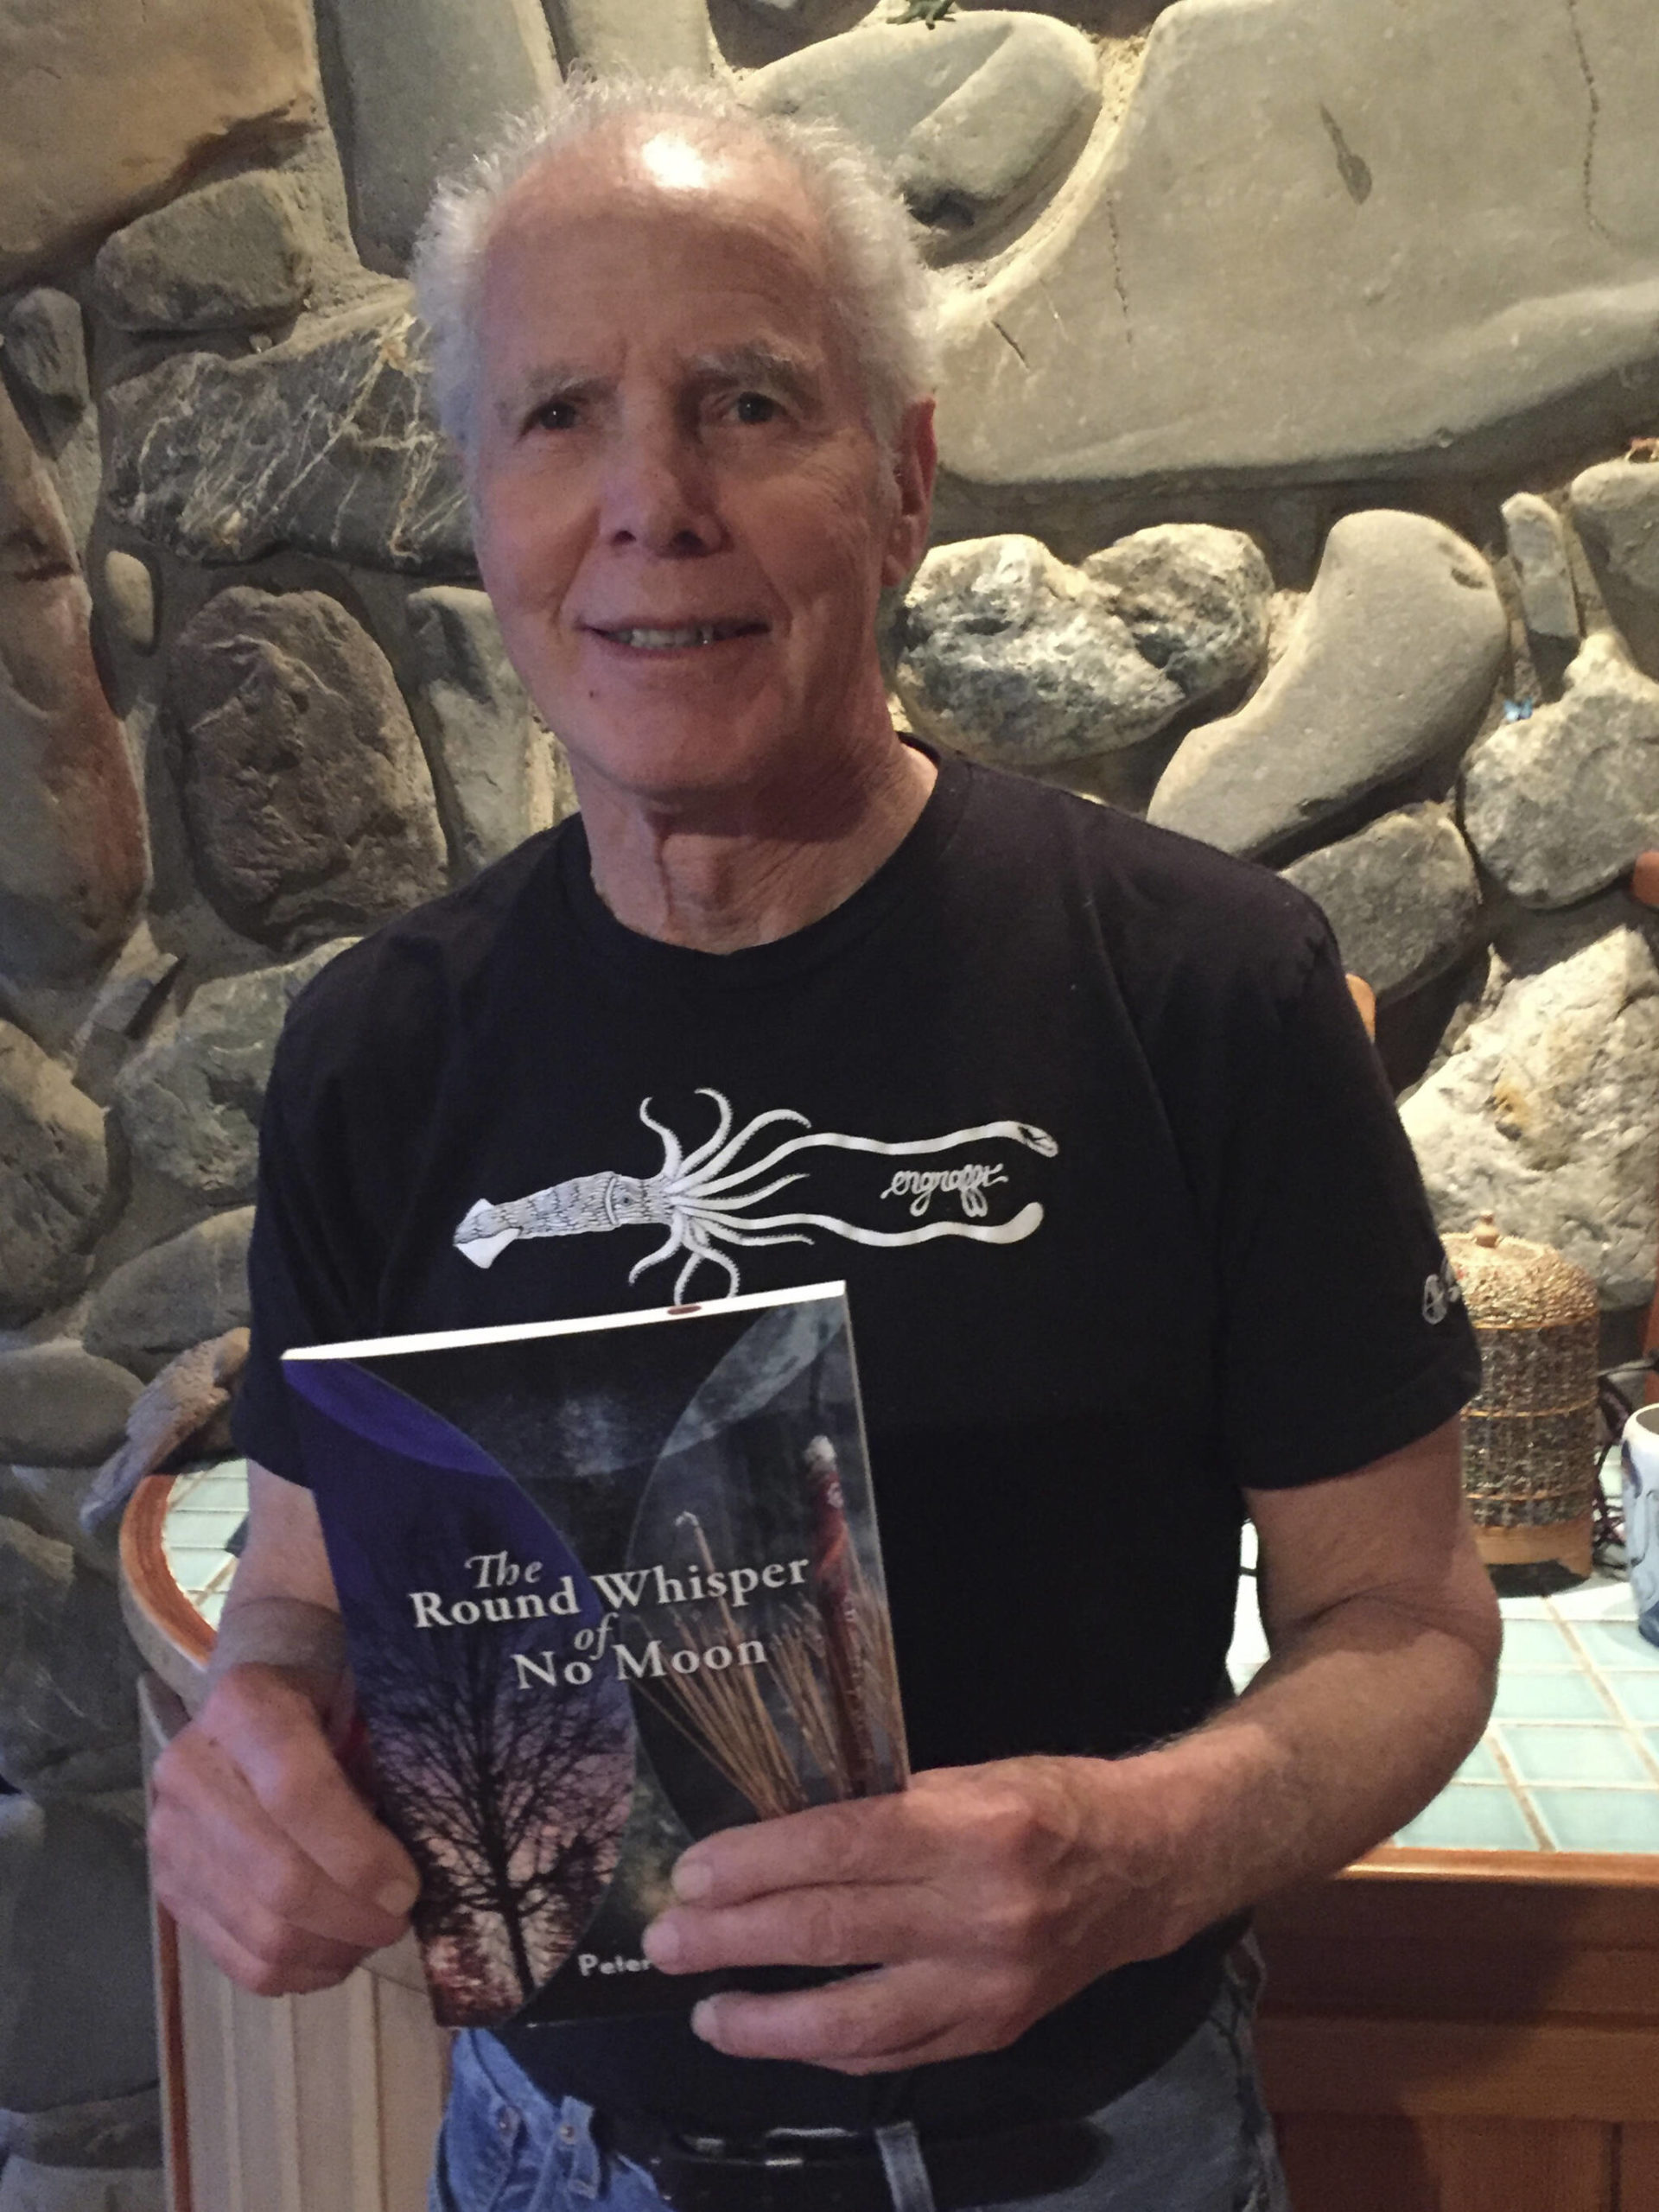 Peter Kaufmann holds a copy of his book of poetry, "The Round Whisper of No Moon." (Photo provided)